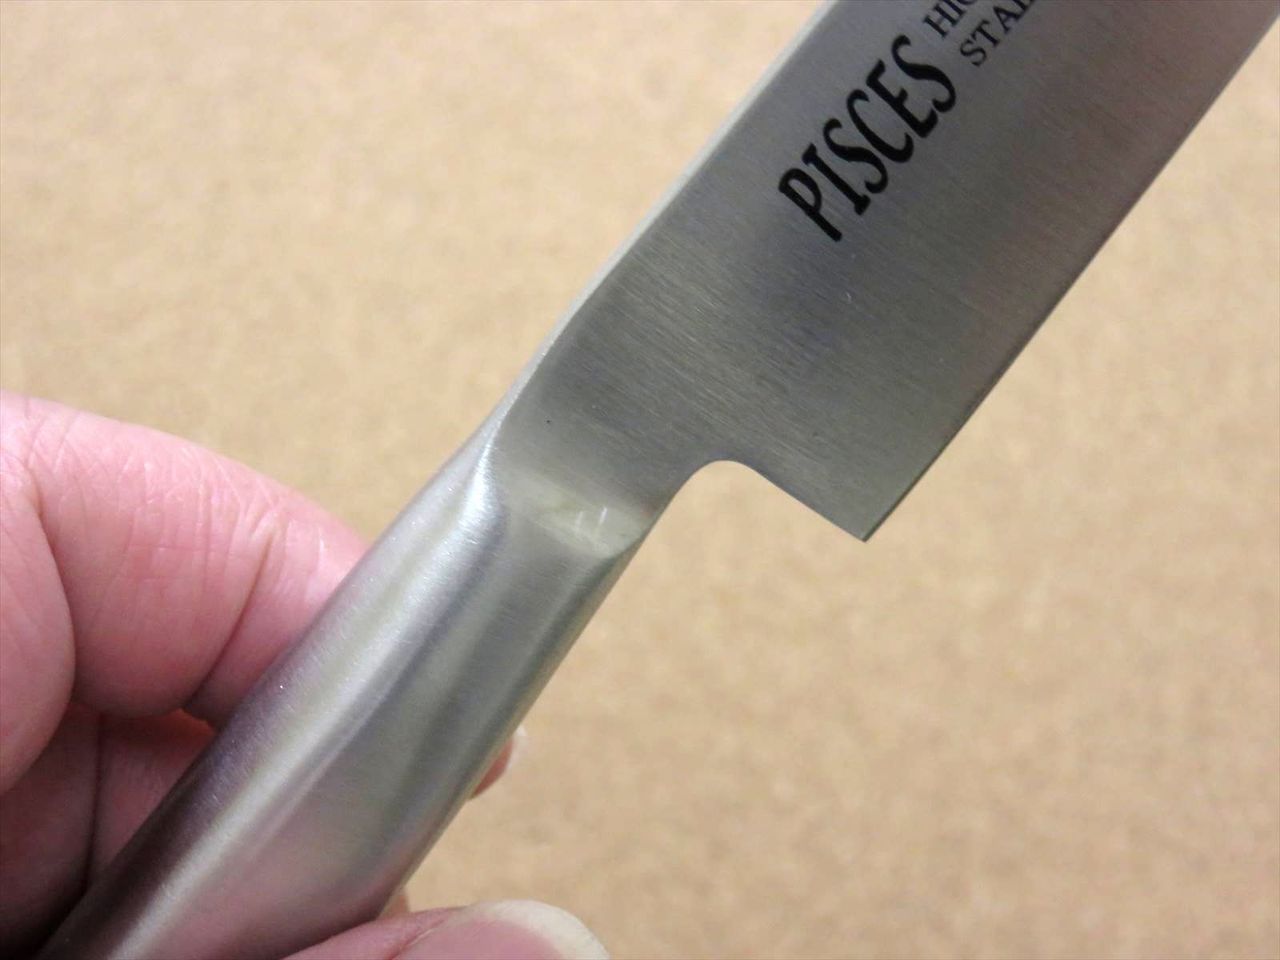 Japanese Pisces Kitchen Petty Utility Knife 5.5 inch Stainless Handle SEKI JAPAN